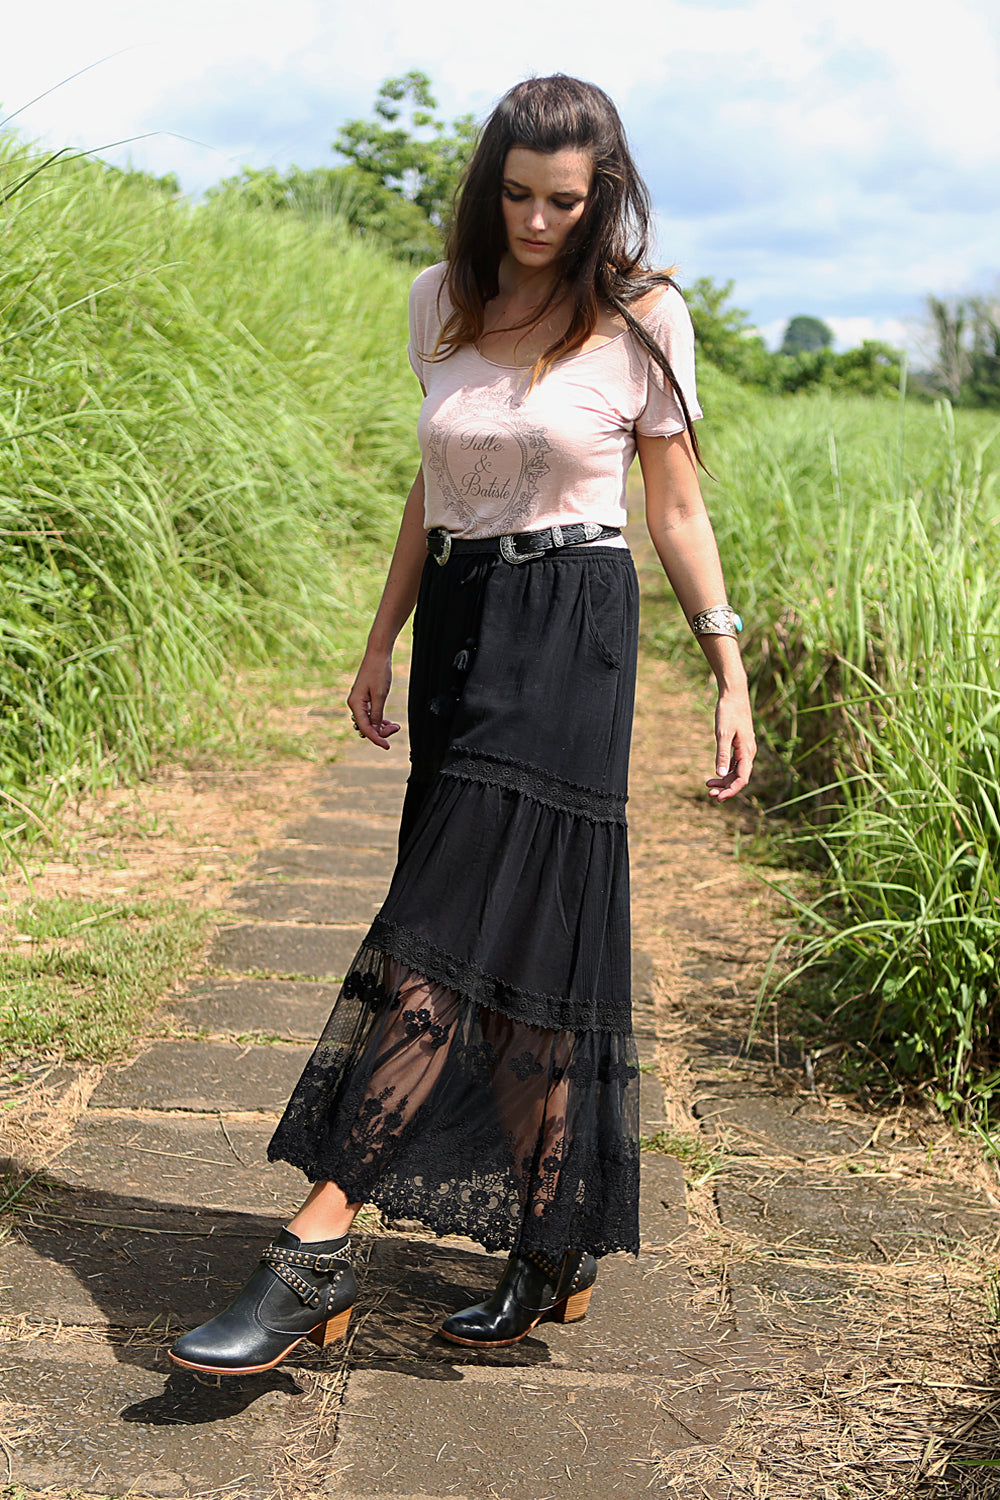 Willow Maxi Skirt - Tulle and Batiste